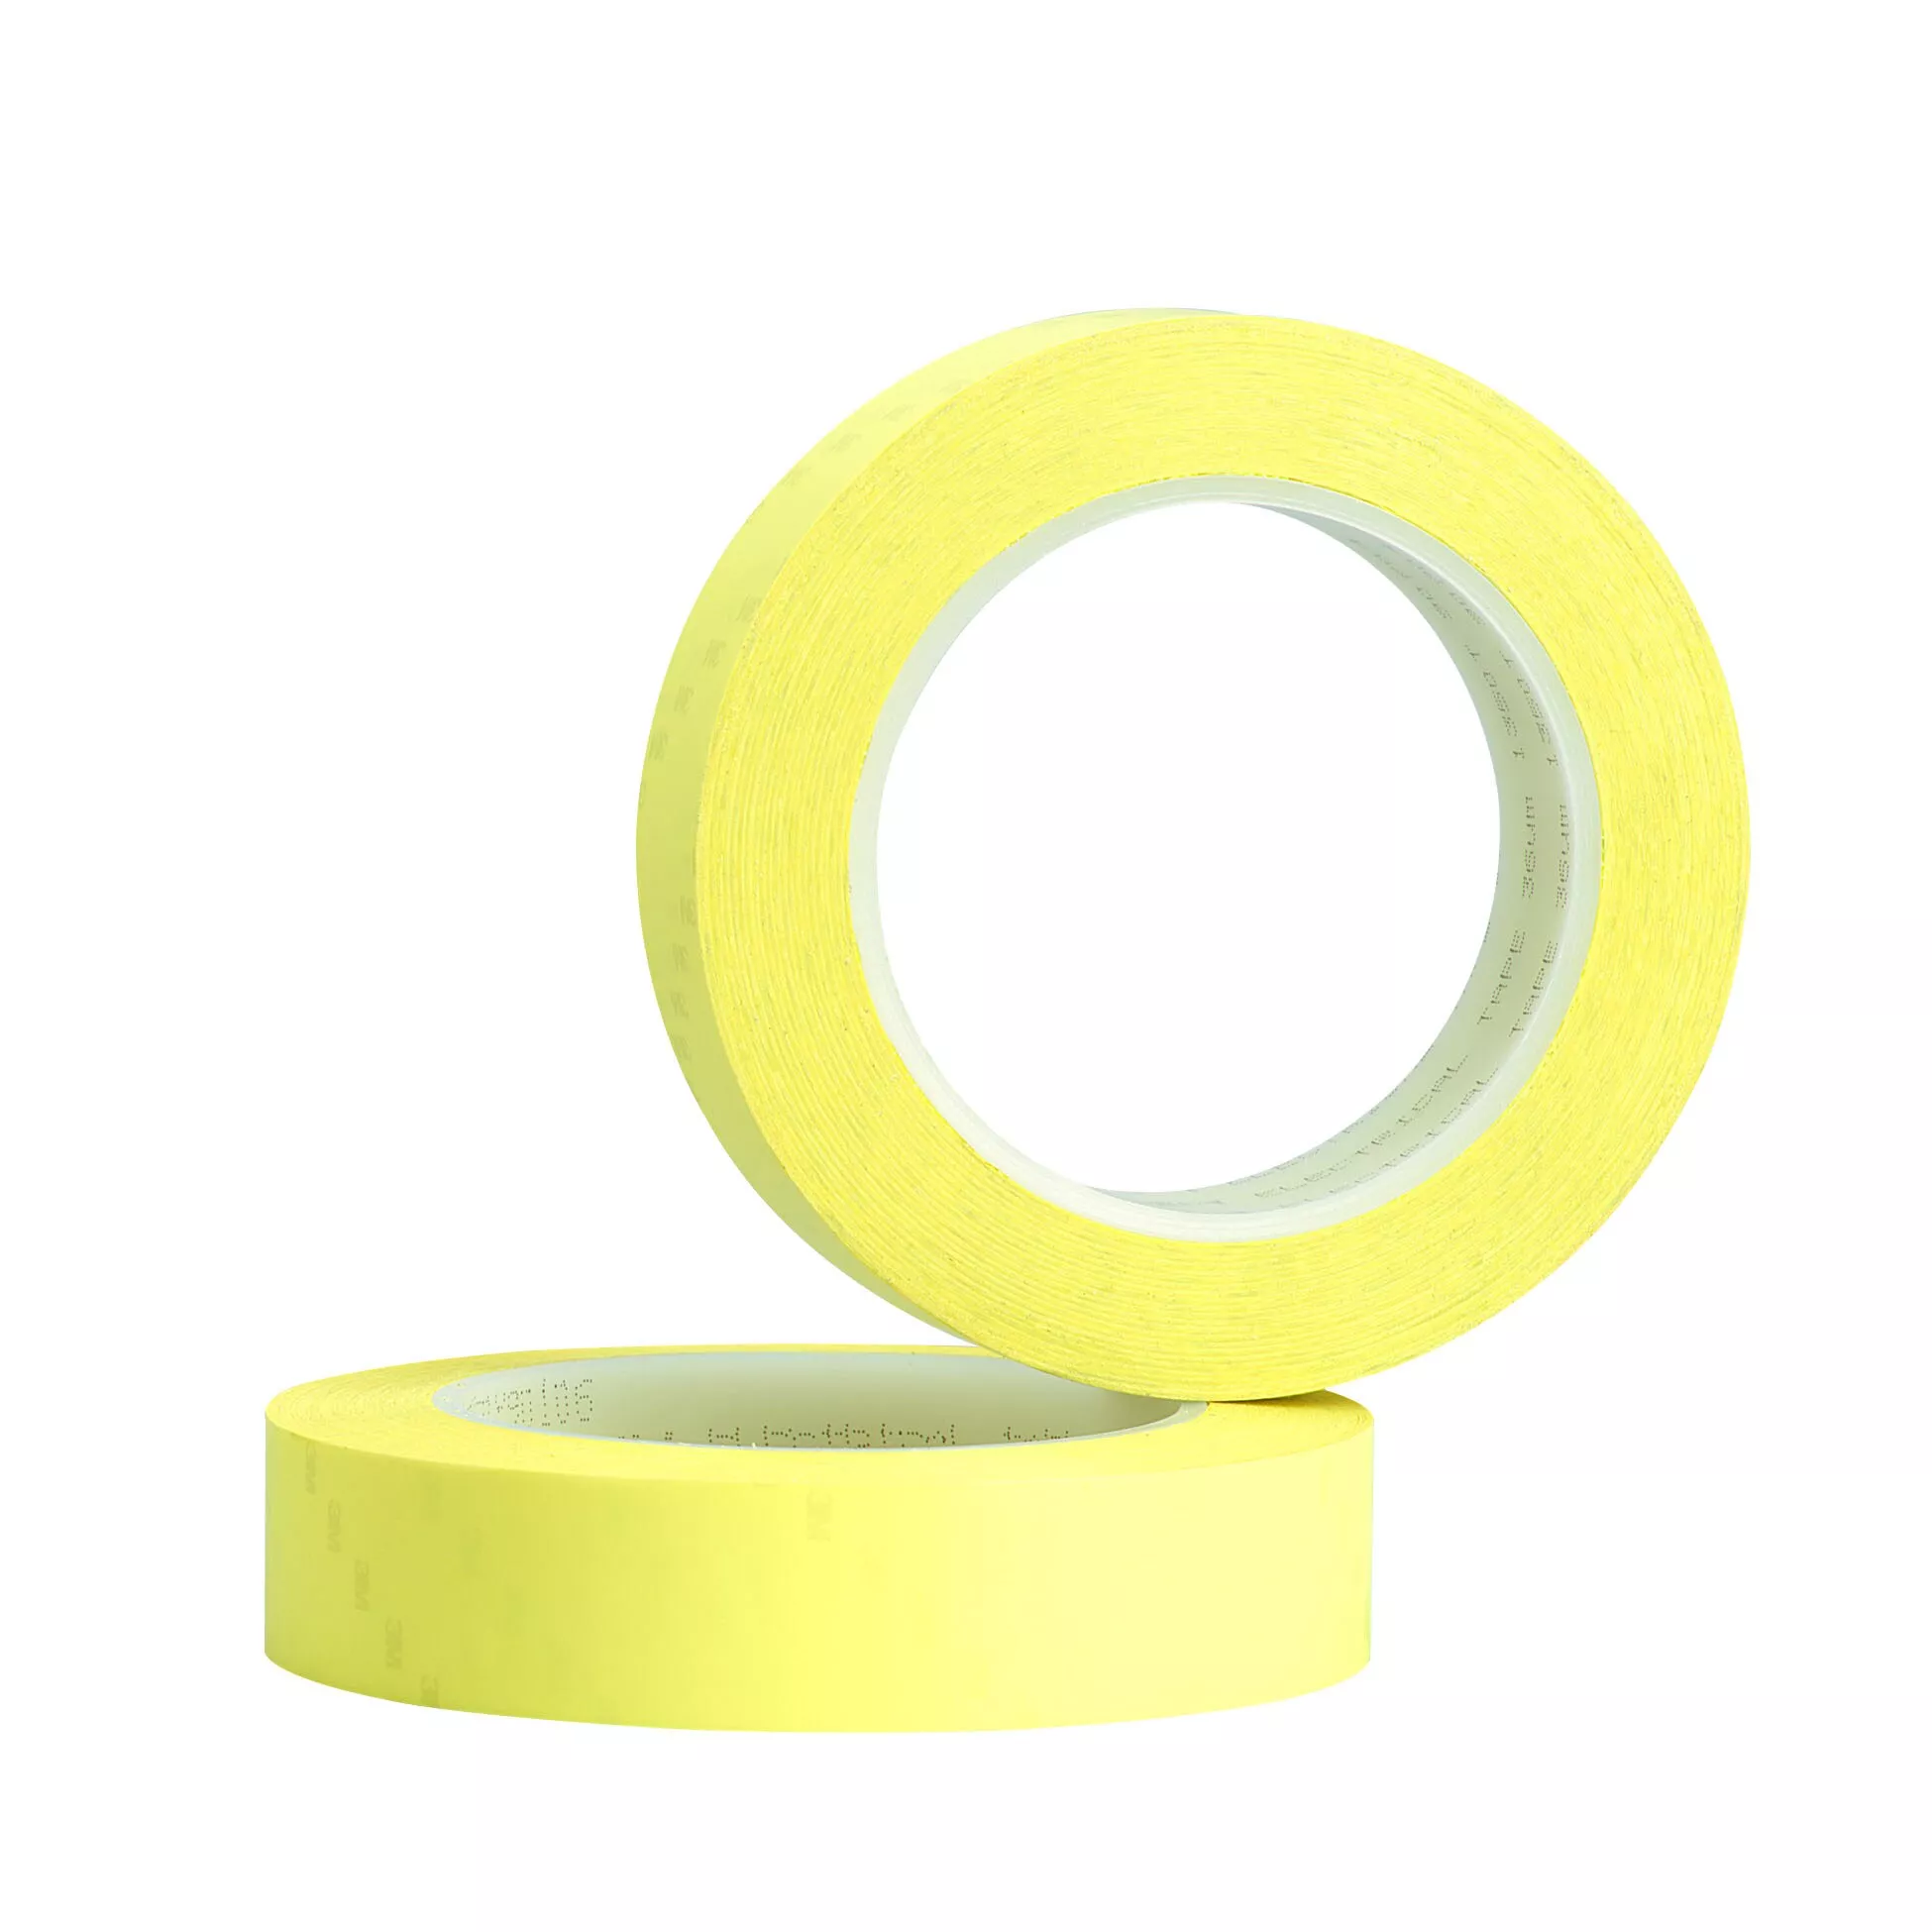 SKU 7100094882 | 3M™ Polyester Film Electrical Tape 57